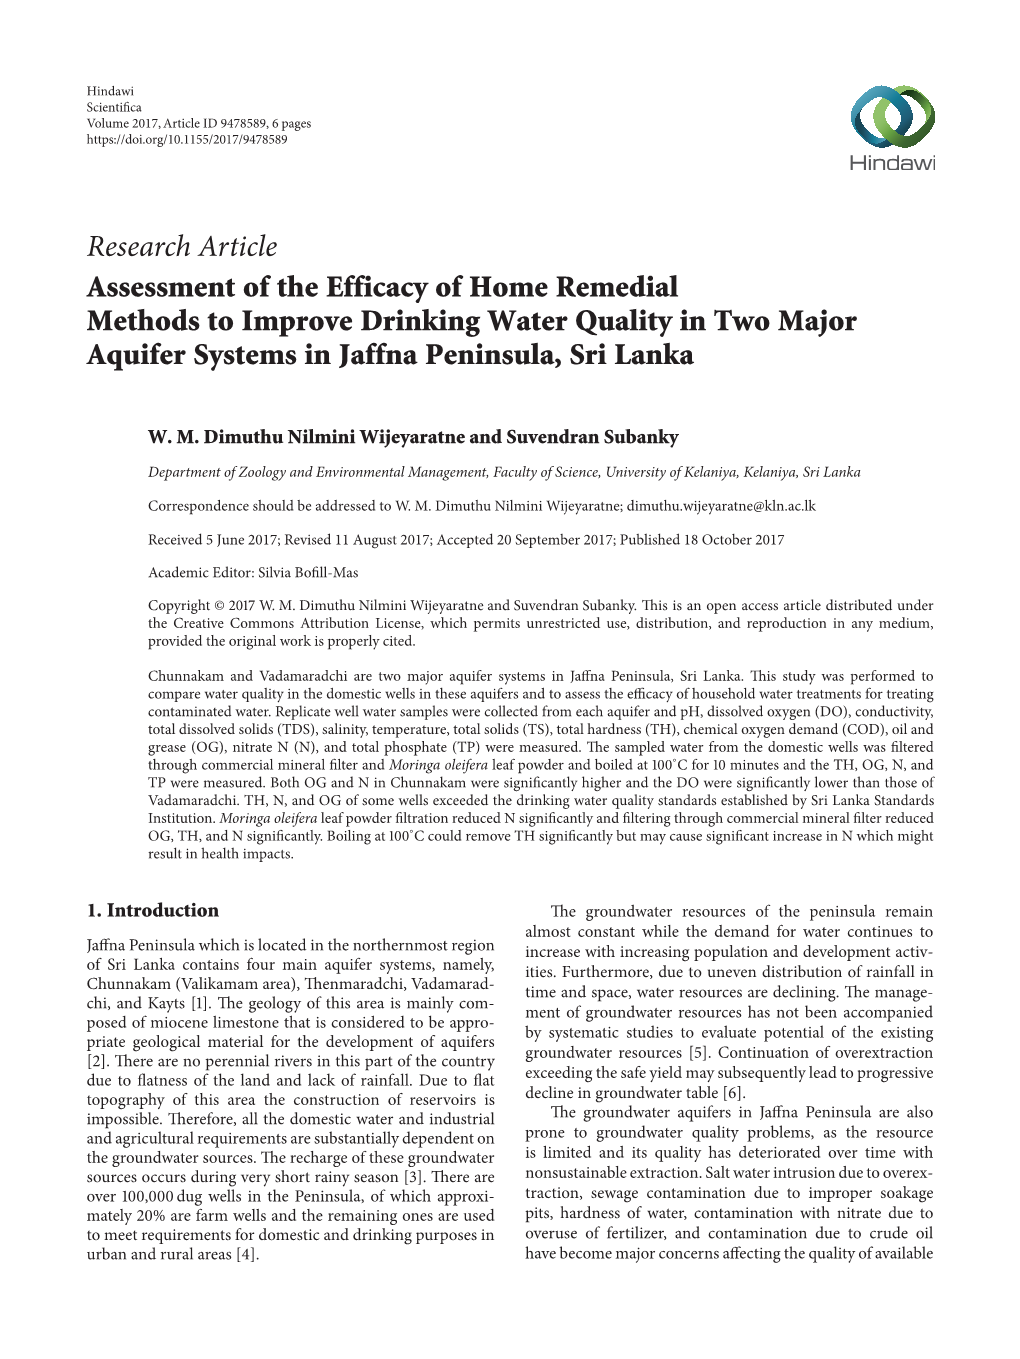 Assessment of the Efficacy of Home Remedial Methods to Improve Drinking Water Quality in Two Major Aquifer Systems in Jaffna Peninsula, Sri Lanka